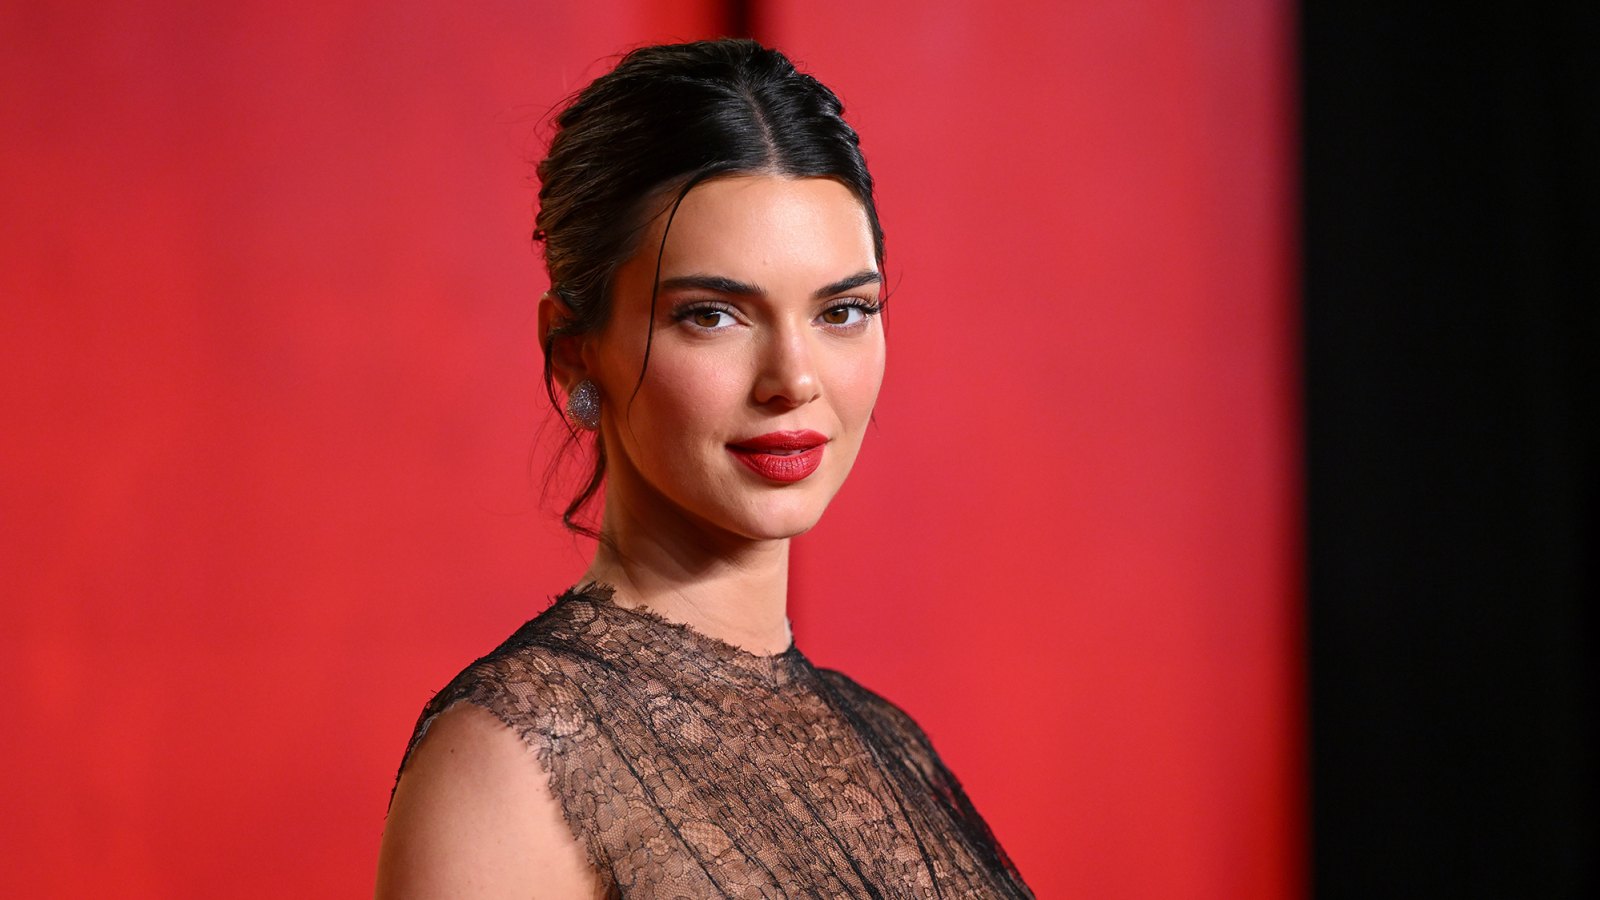 Kendall Jenner Uses This $12 Concealer and Says It's 'So Nice' - Us Weekly